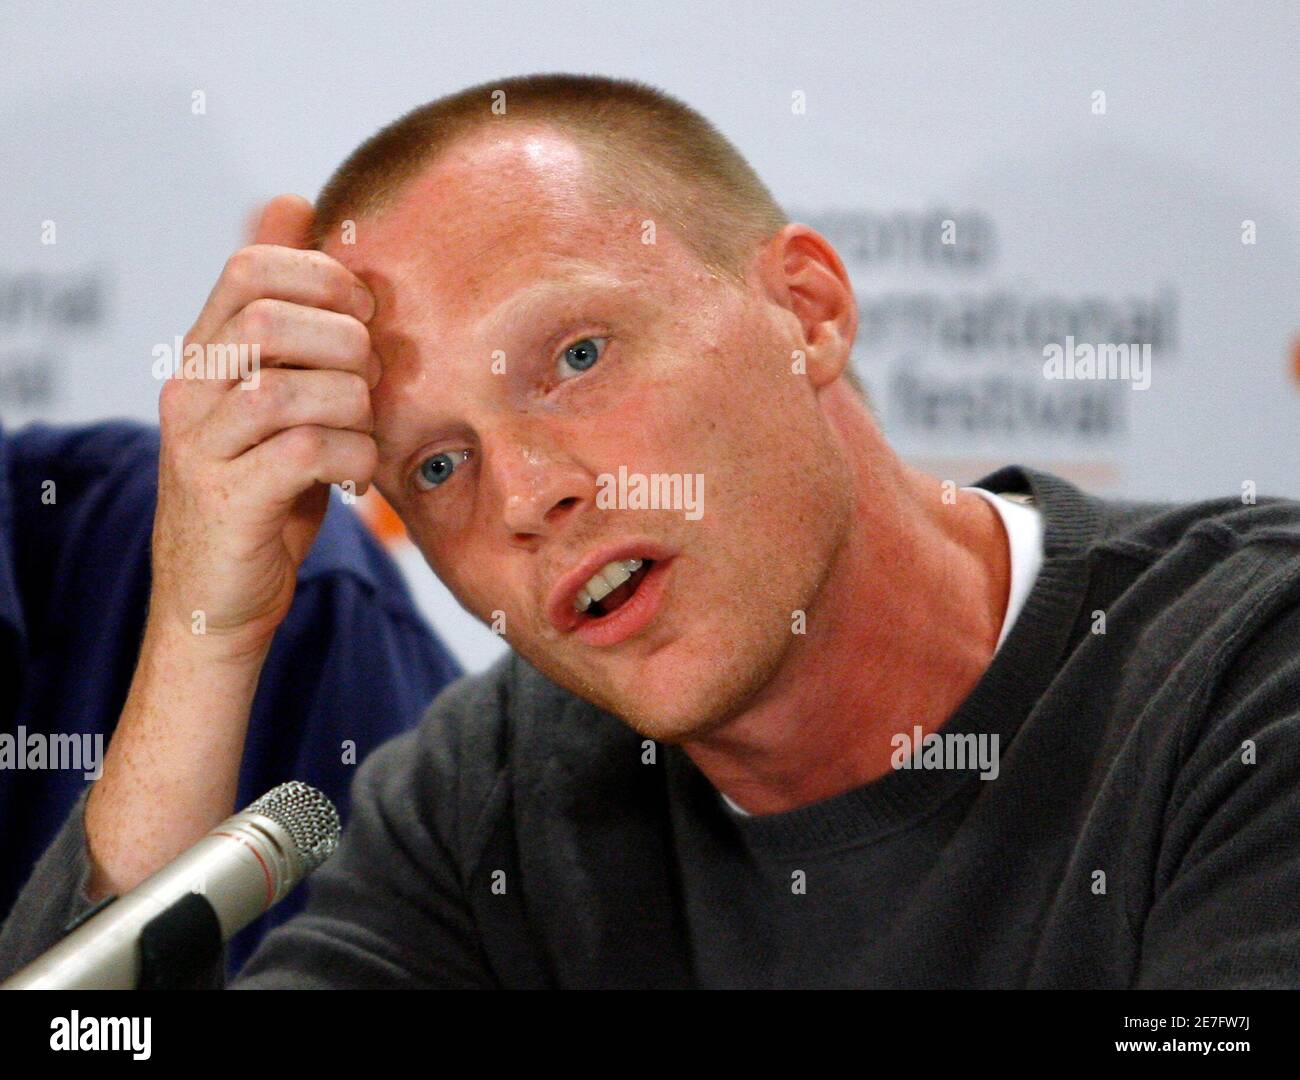 British actor Paul Bettany speaks during the news conference for the film 'Creation' at the Toronto International Film Festival September 11, 2009. The Toronto International Film Festival made a rare break with tradition at its gala opening on Thursday night, debuting British drama 'Creation' at the key event long considered a starting point in the race for Oscars.      REUTERS/Mike Cassese   (CANADA ENTERTAINMENT) Stock Photo